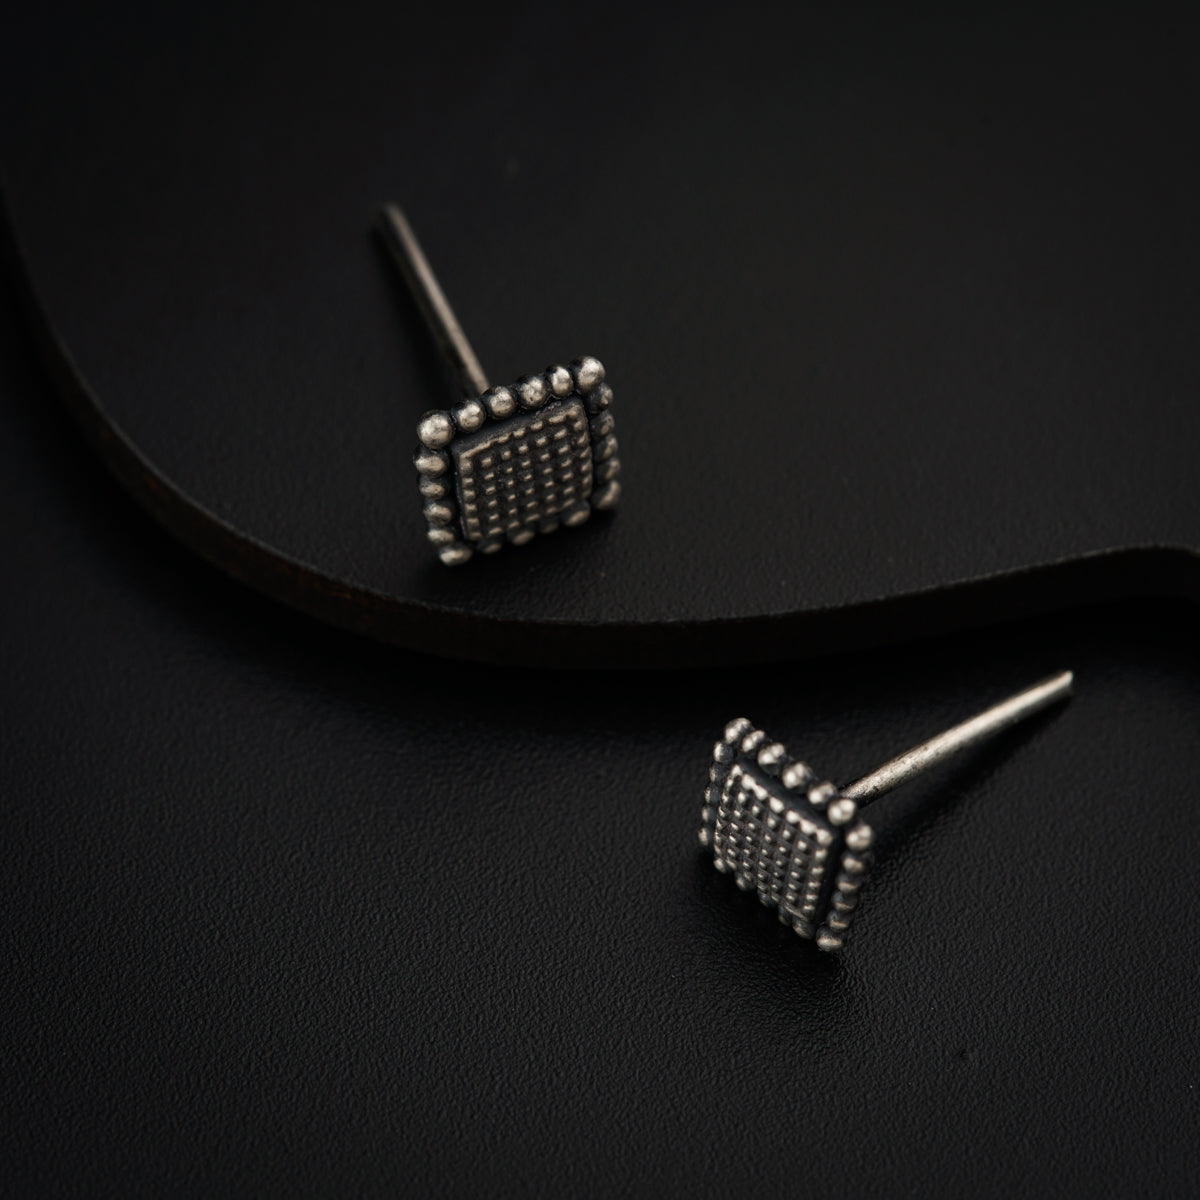 a pair of silver studded earrings sitting on top of a black surface